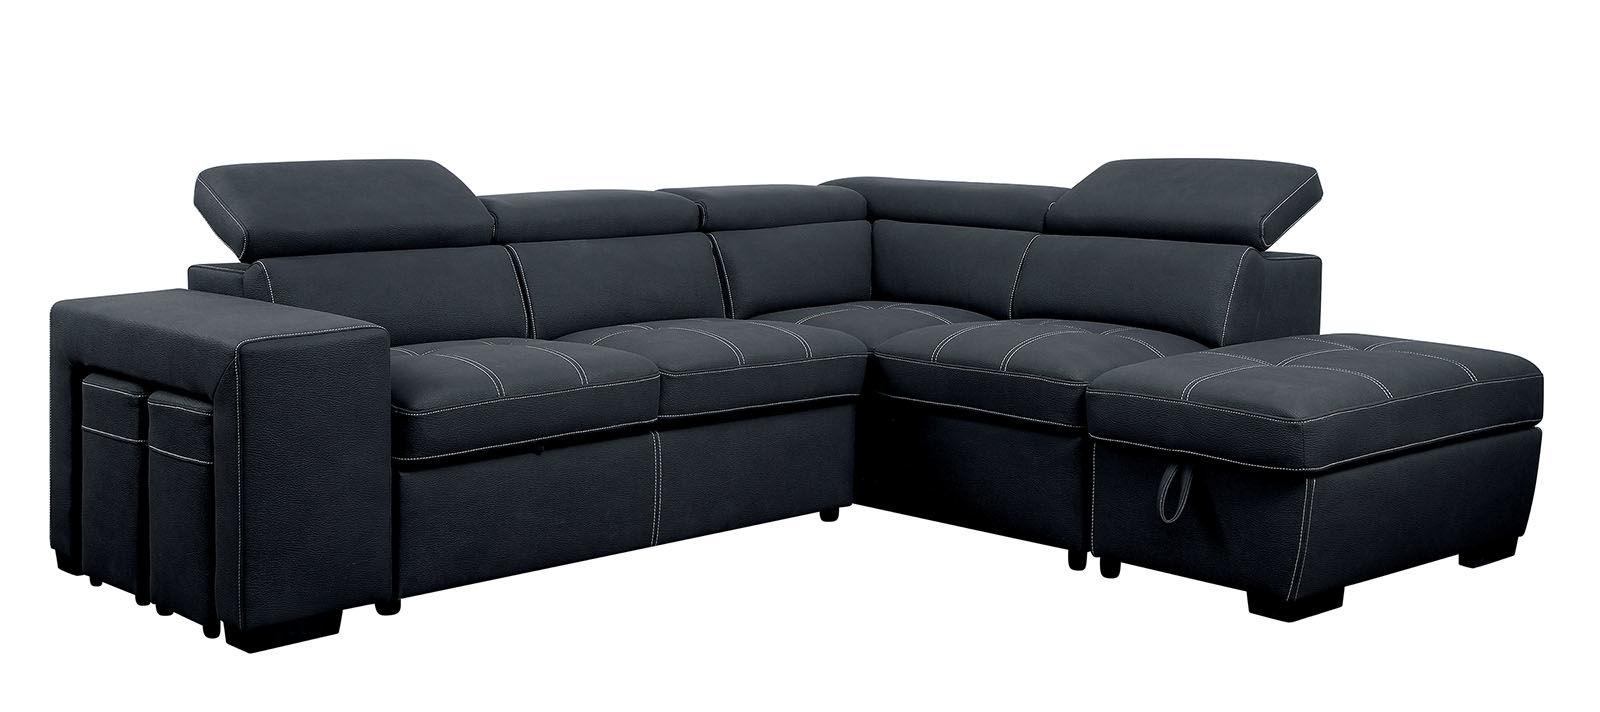 Contemporary Sectional Sofa CM6603 Athene CM6603 in Graphite Fabric